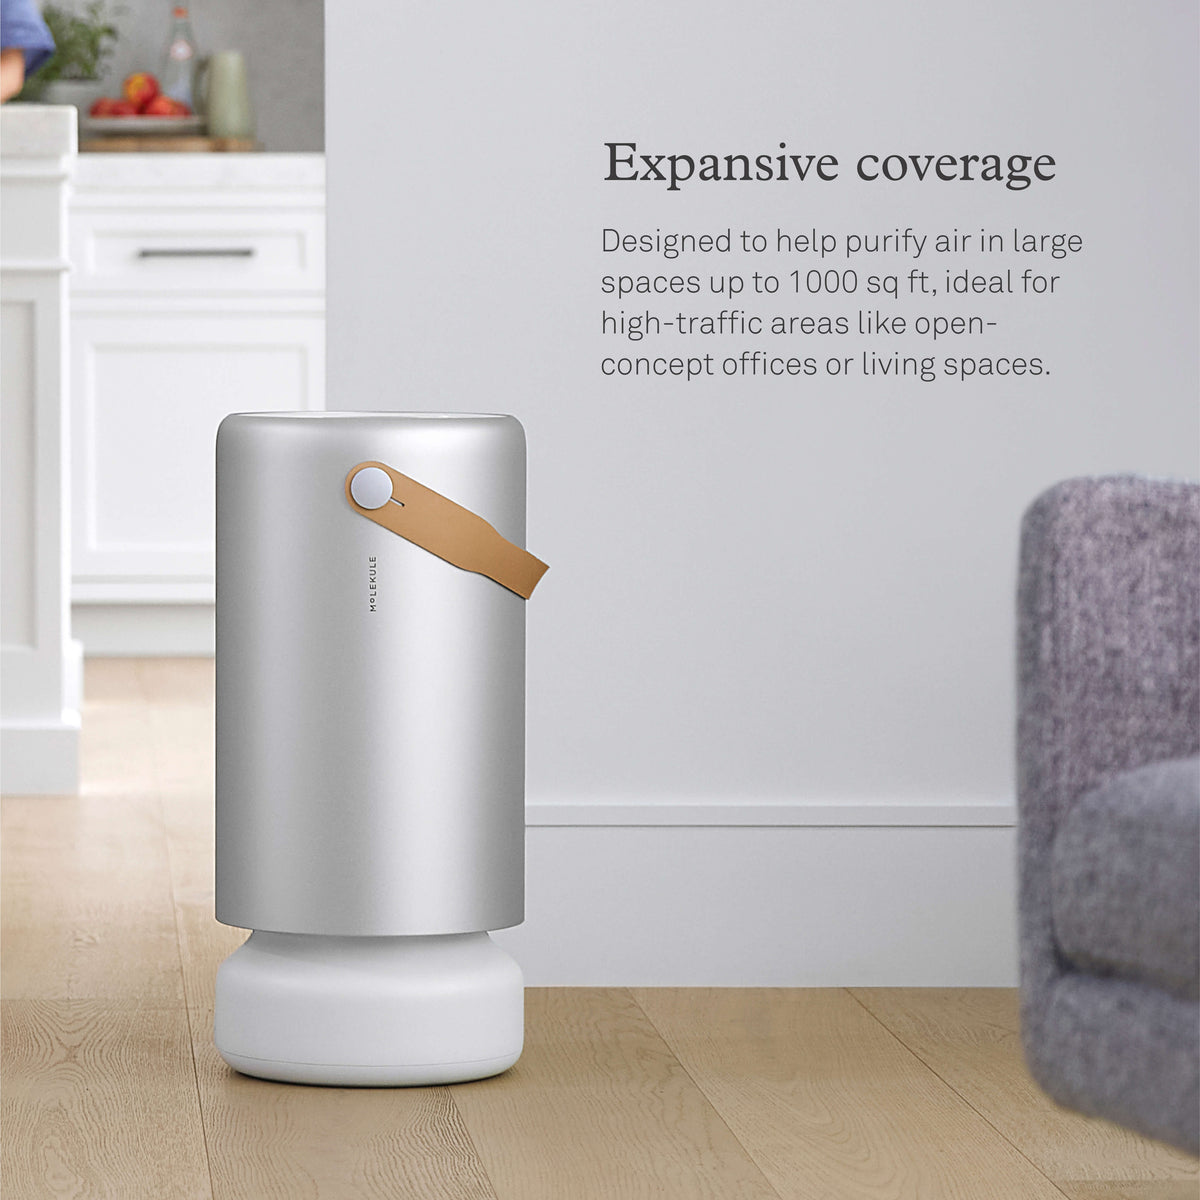 Molekule Air Pro air purifier in a bright home. Expansive coverage. Designed to help purify air in large spaces up to 1000 sq ft, ideal for high-traffic areas like open-concept offices or living spaces.